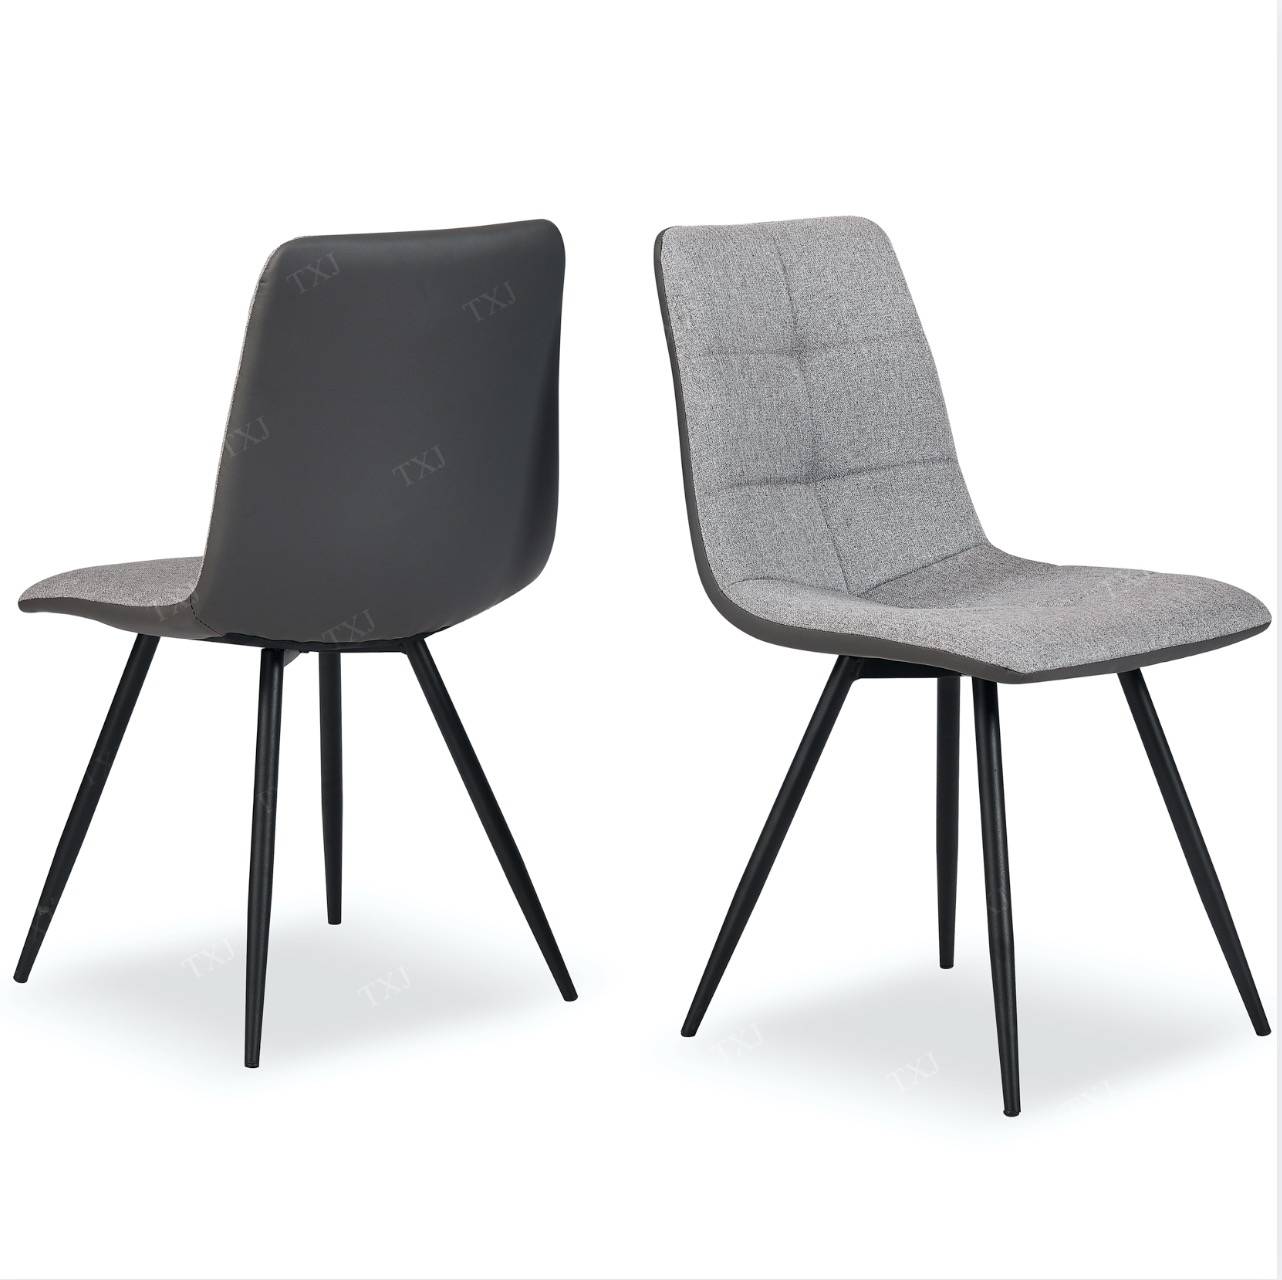 Promotional Dining Chair TC-2063 Featured Image